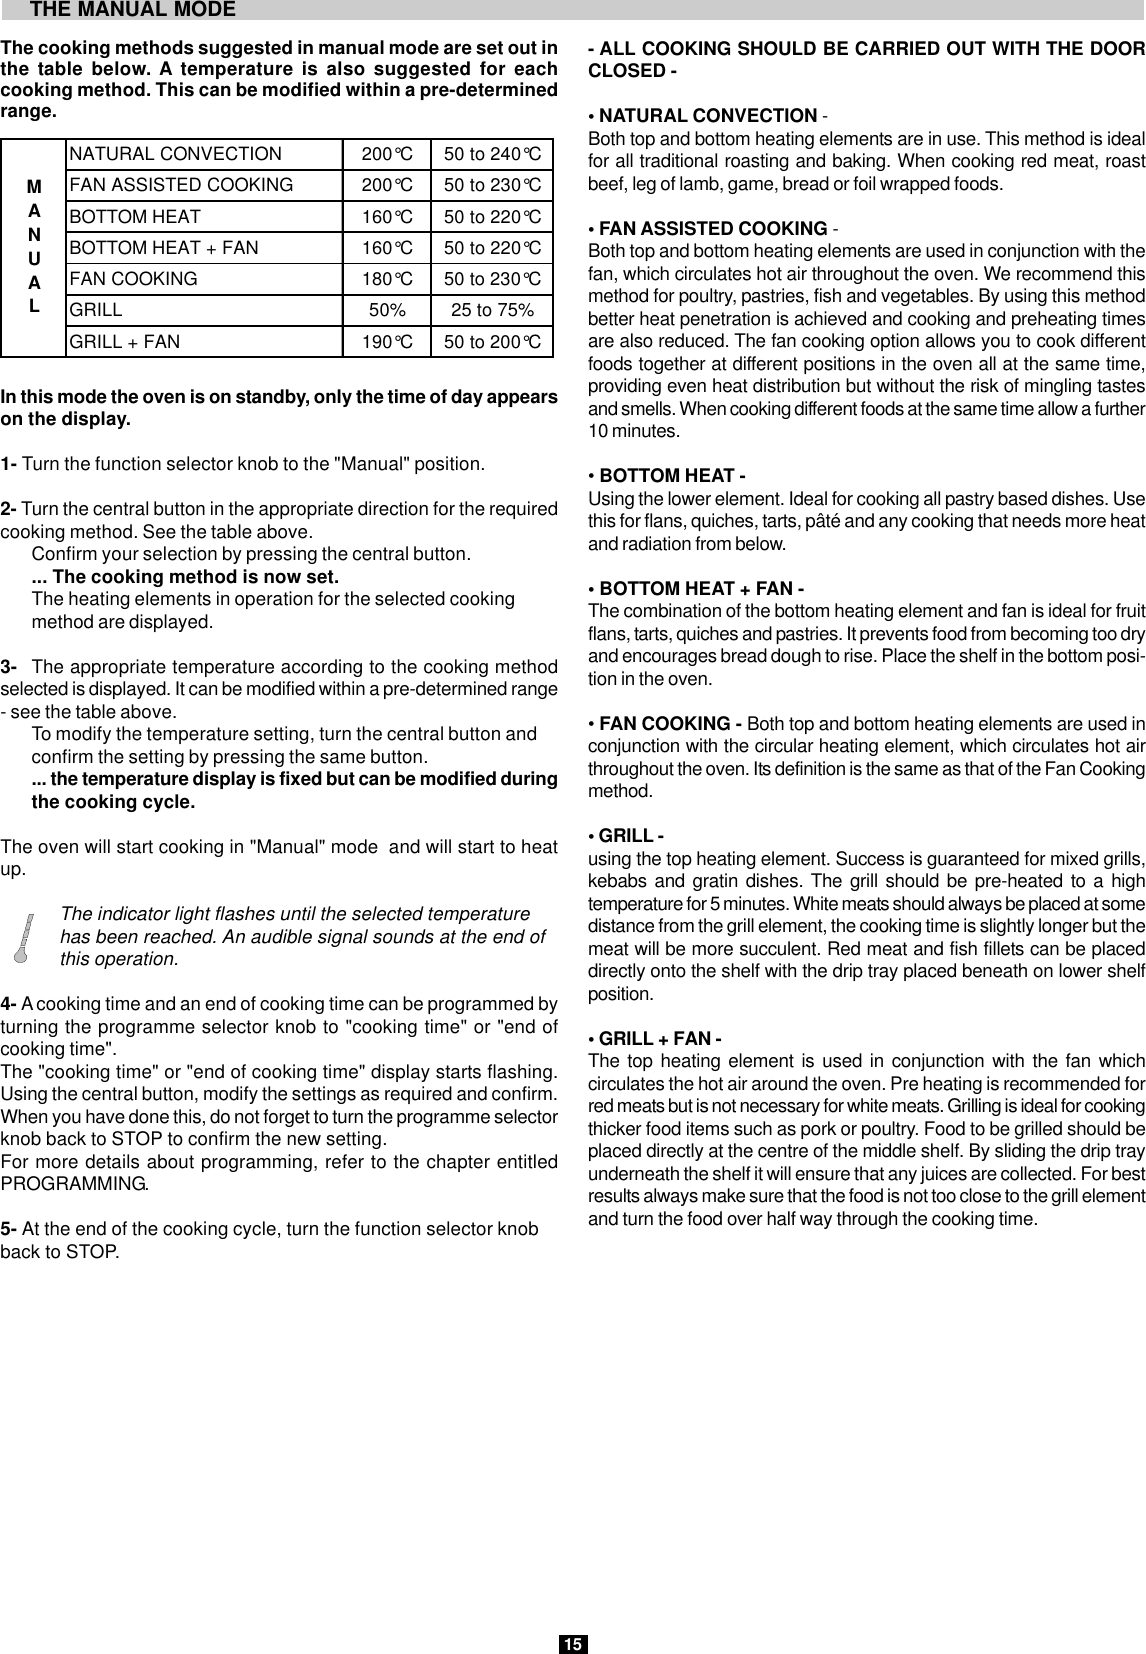 Page 7 of 9 - Hoover Signature Multi-Function Oven HOS 556 X Instruction Manual - Product Code 33700252 HOS556X